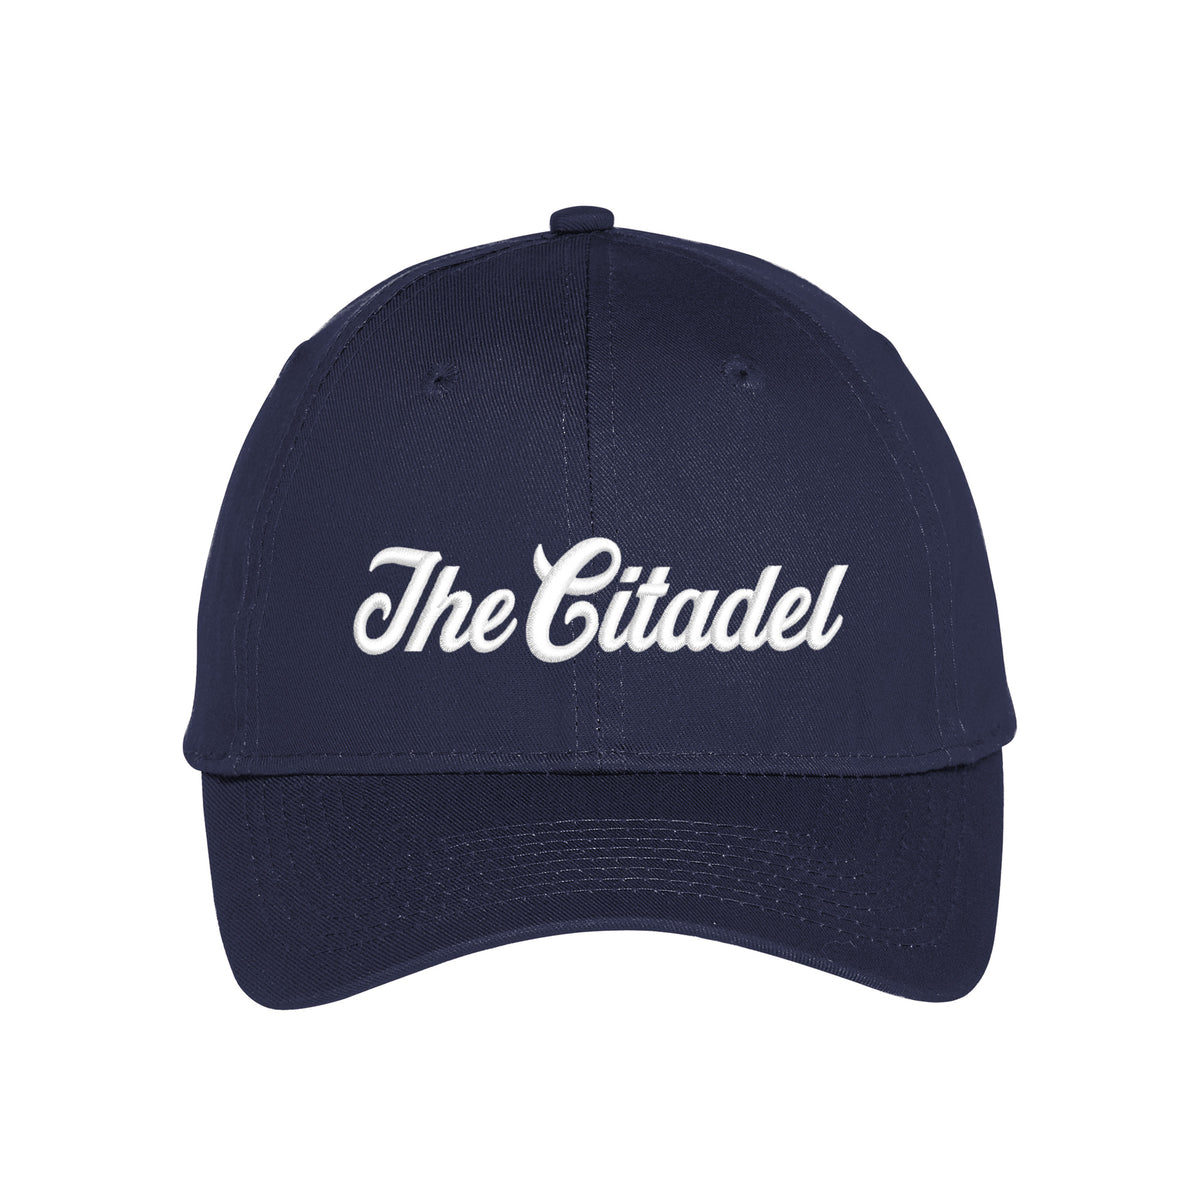 The Citadel Unstructured Twill Cap-Navy